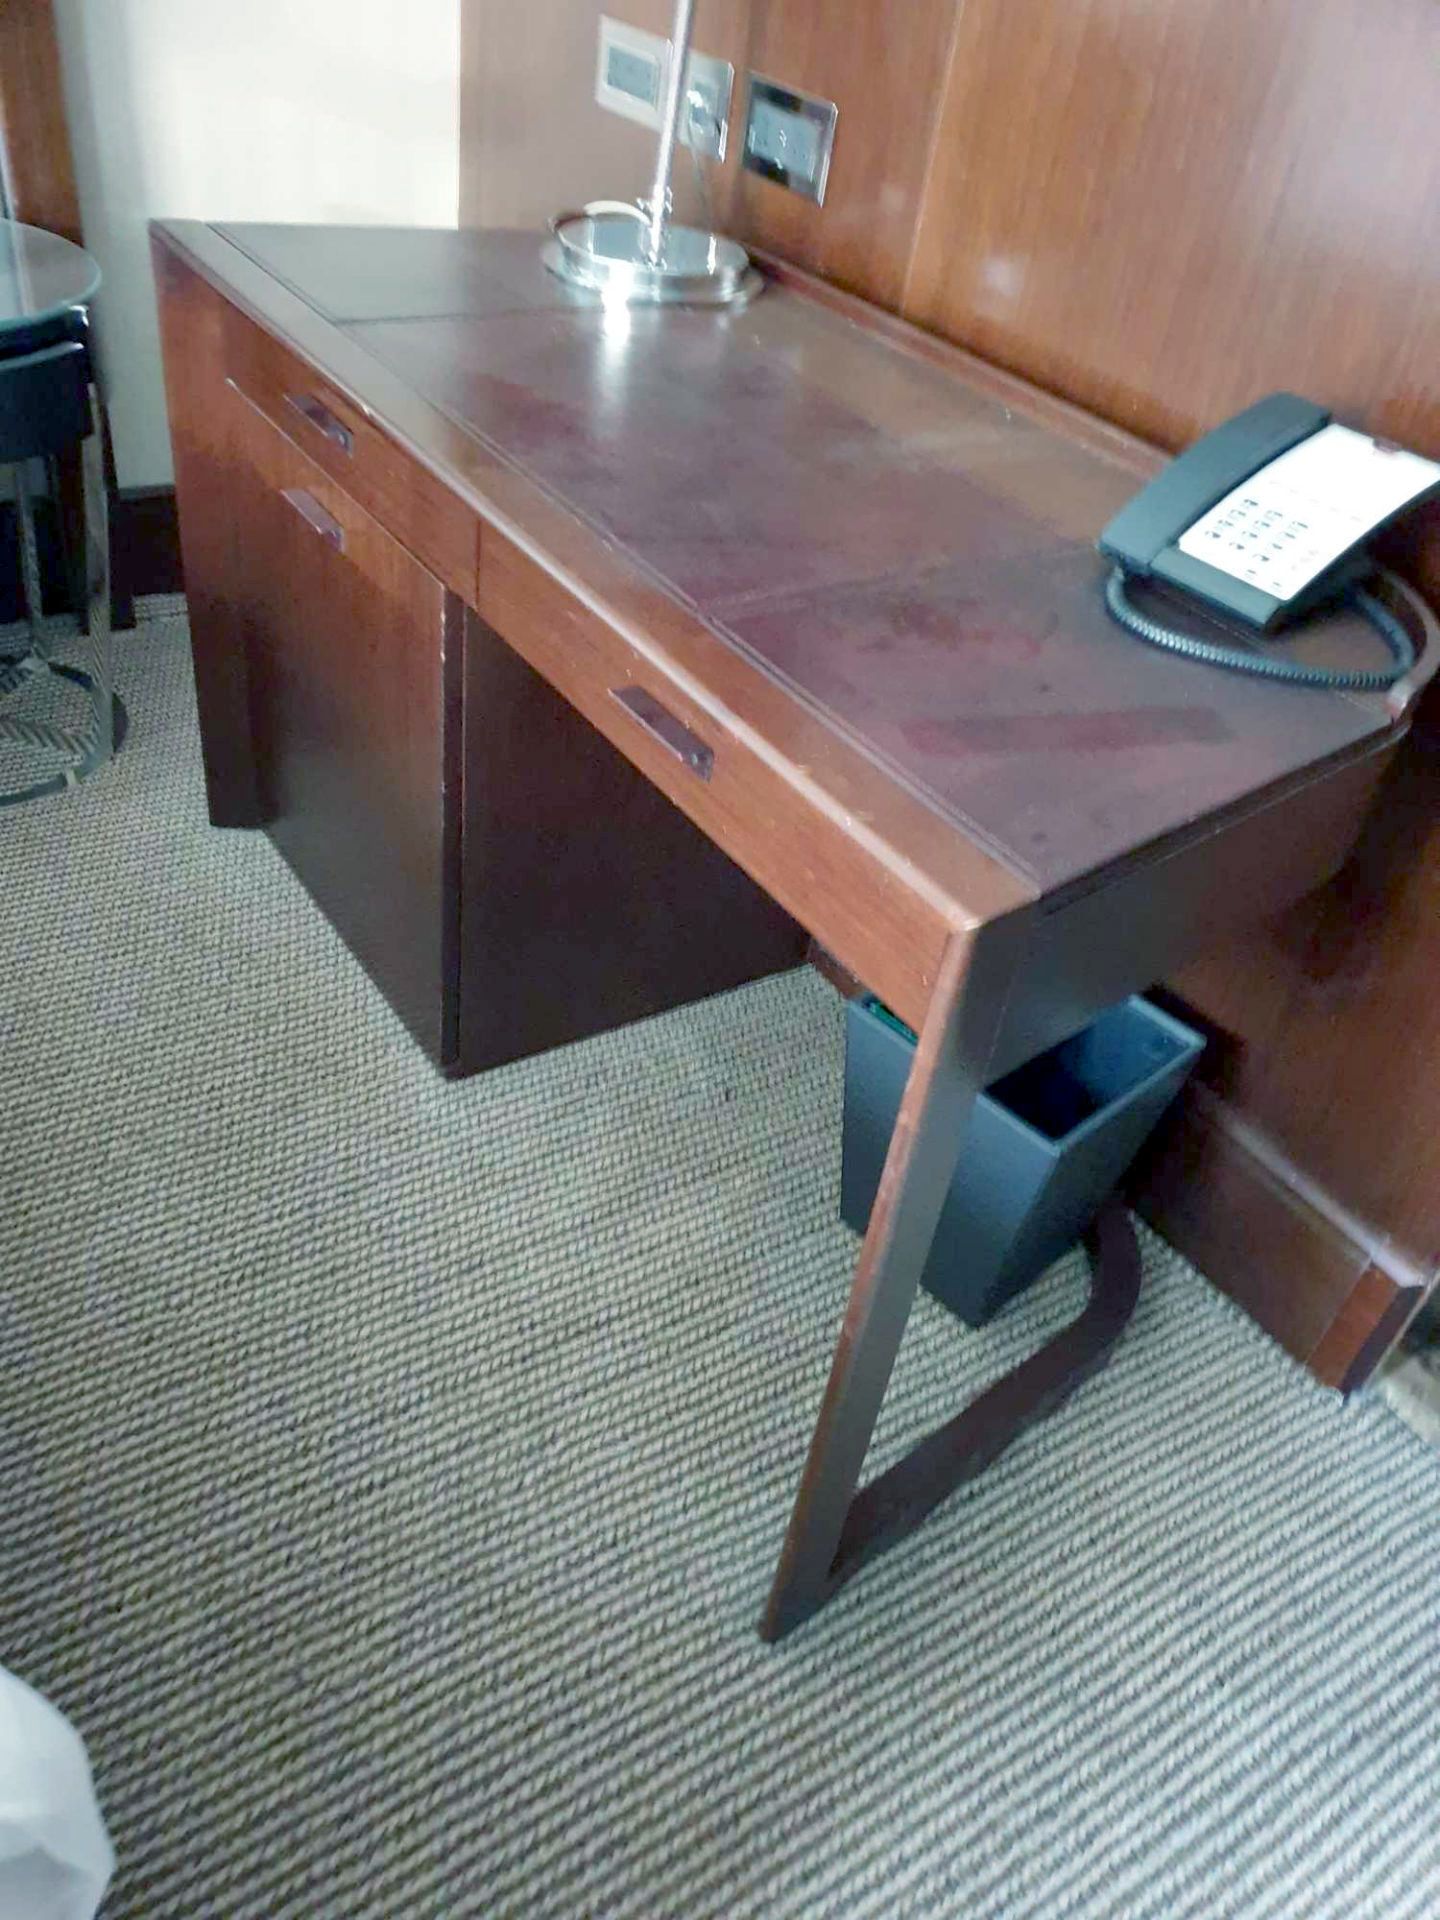 Walnut Veneer Desk By David Salmon With Fitted Drawer And cupboard Fitted With Dometic Minibar Hipro - Bild 2 aus 2